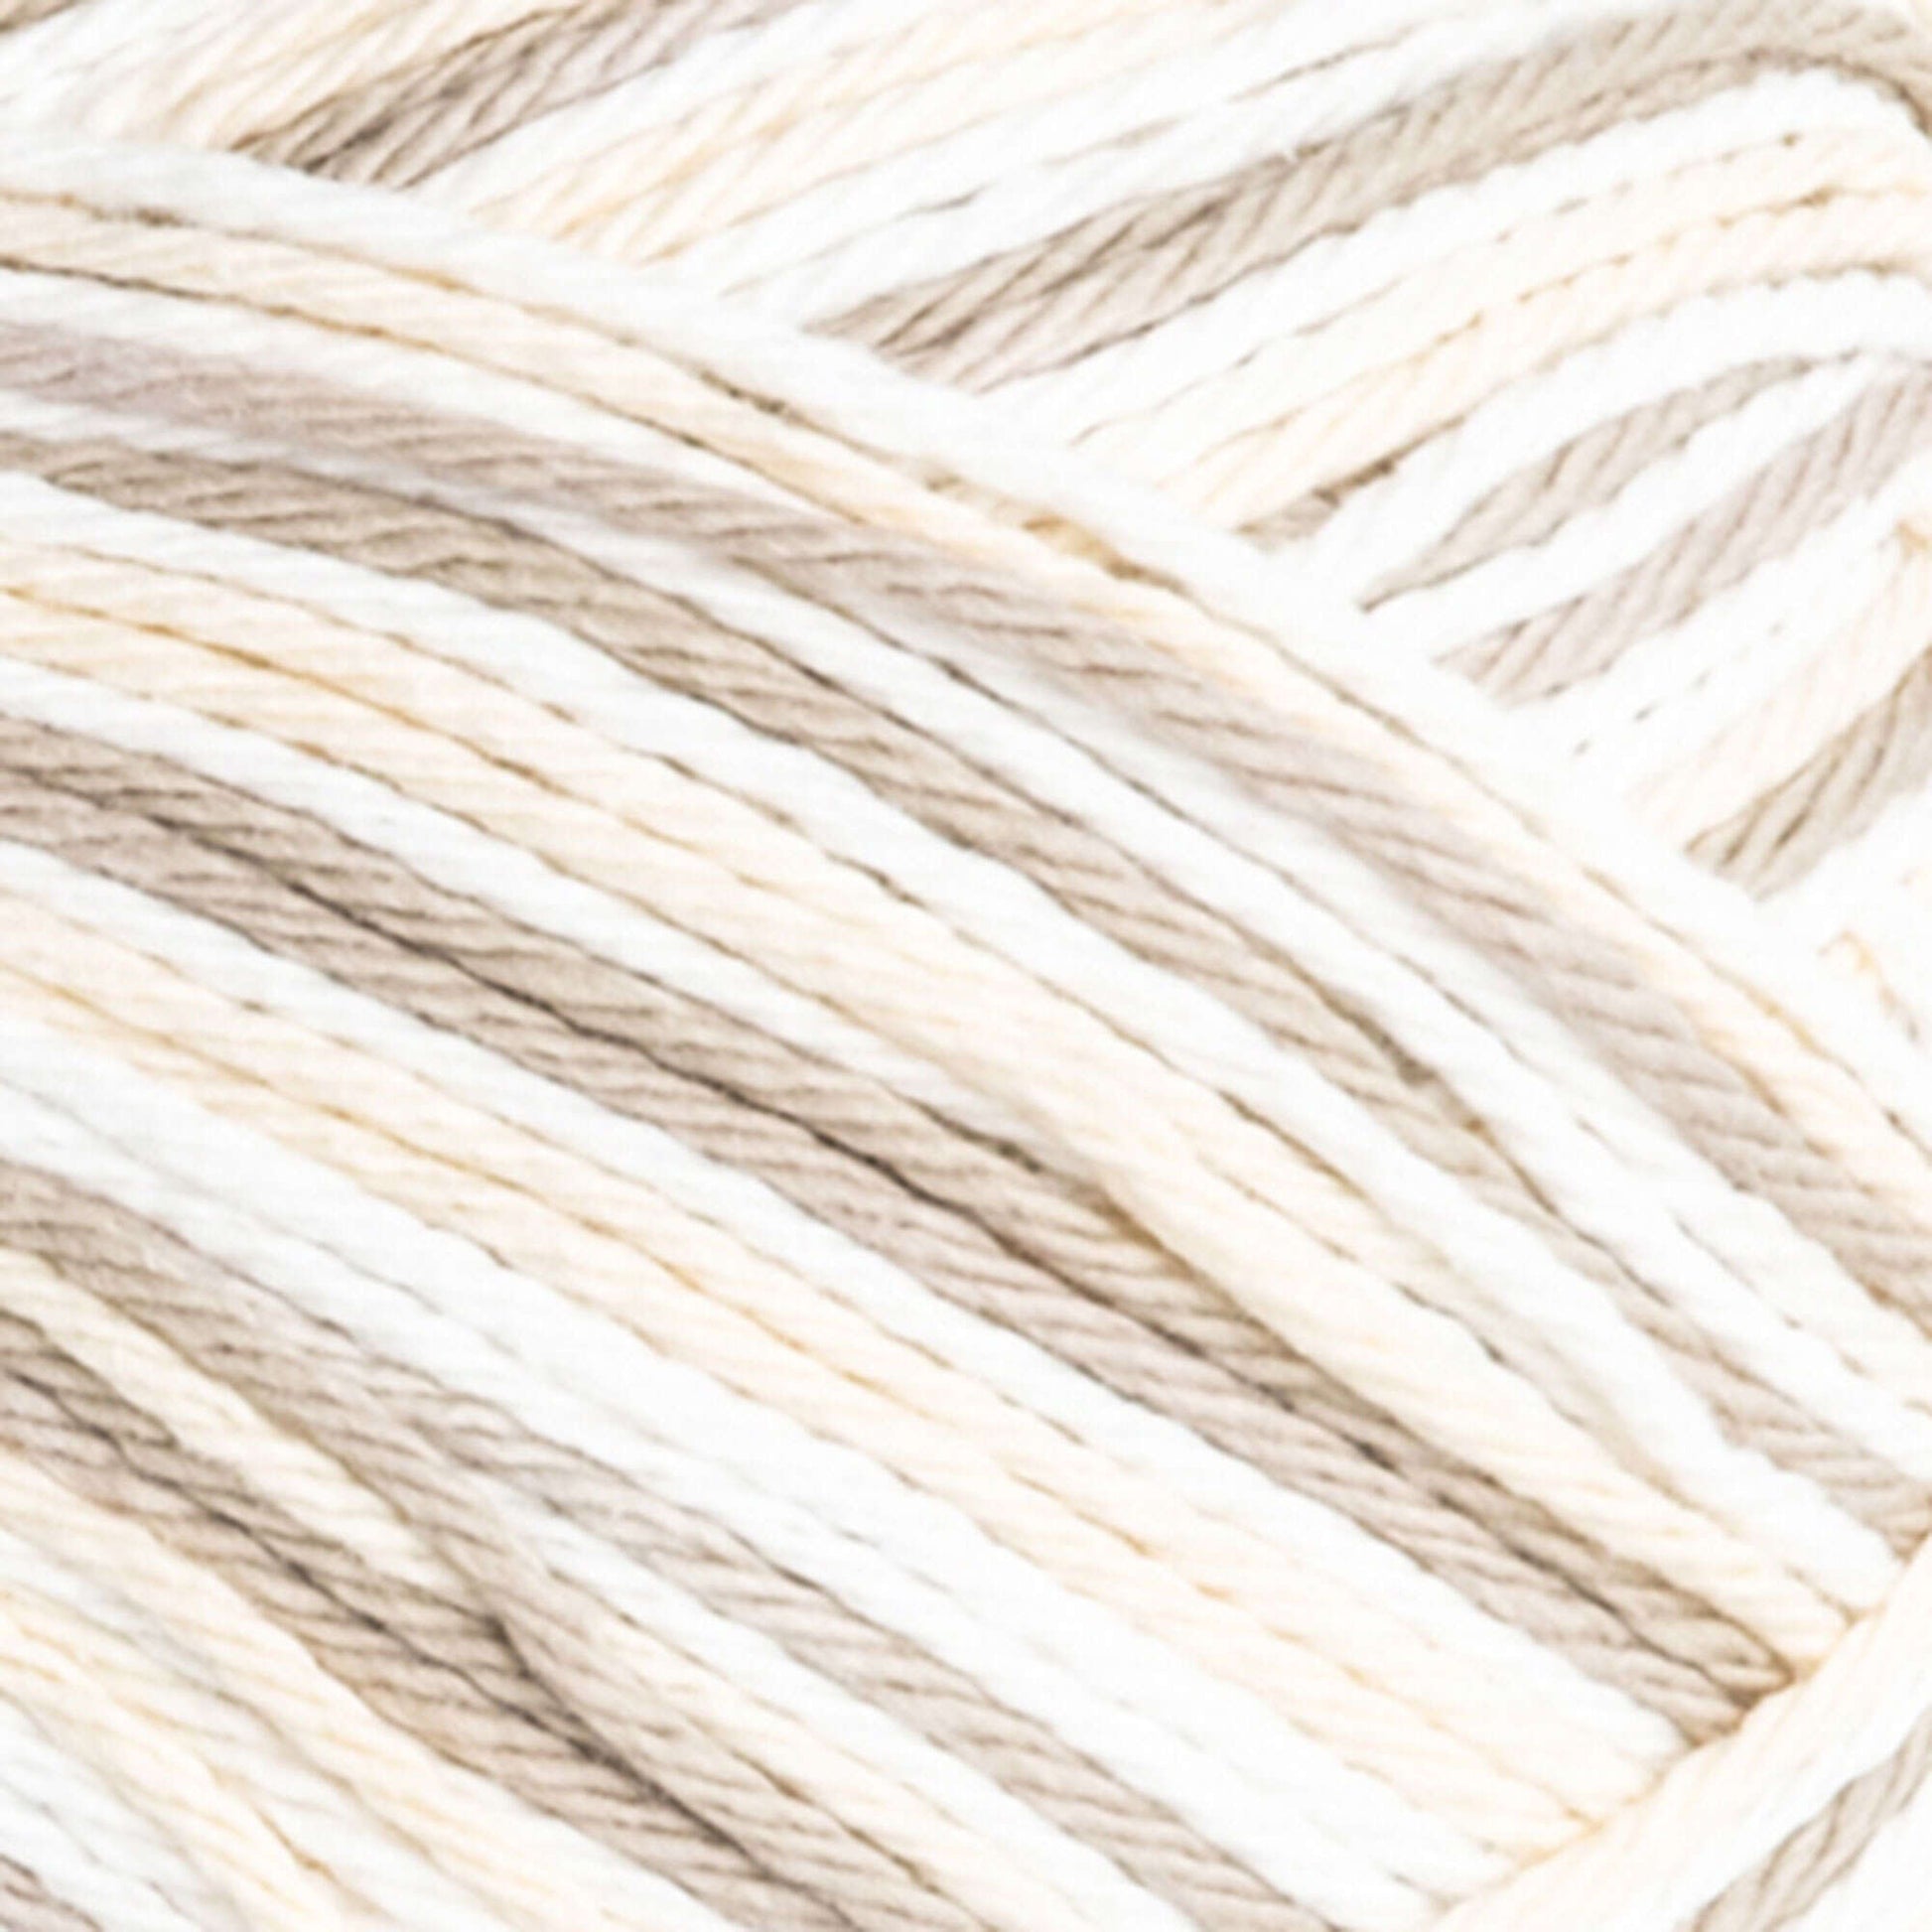 Bernat Handicrafter Cotton Ombres Yarn (340g/12oz) Queen Anne's Lace